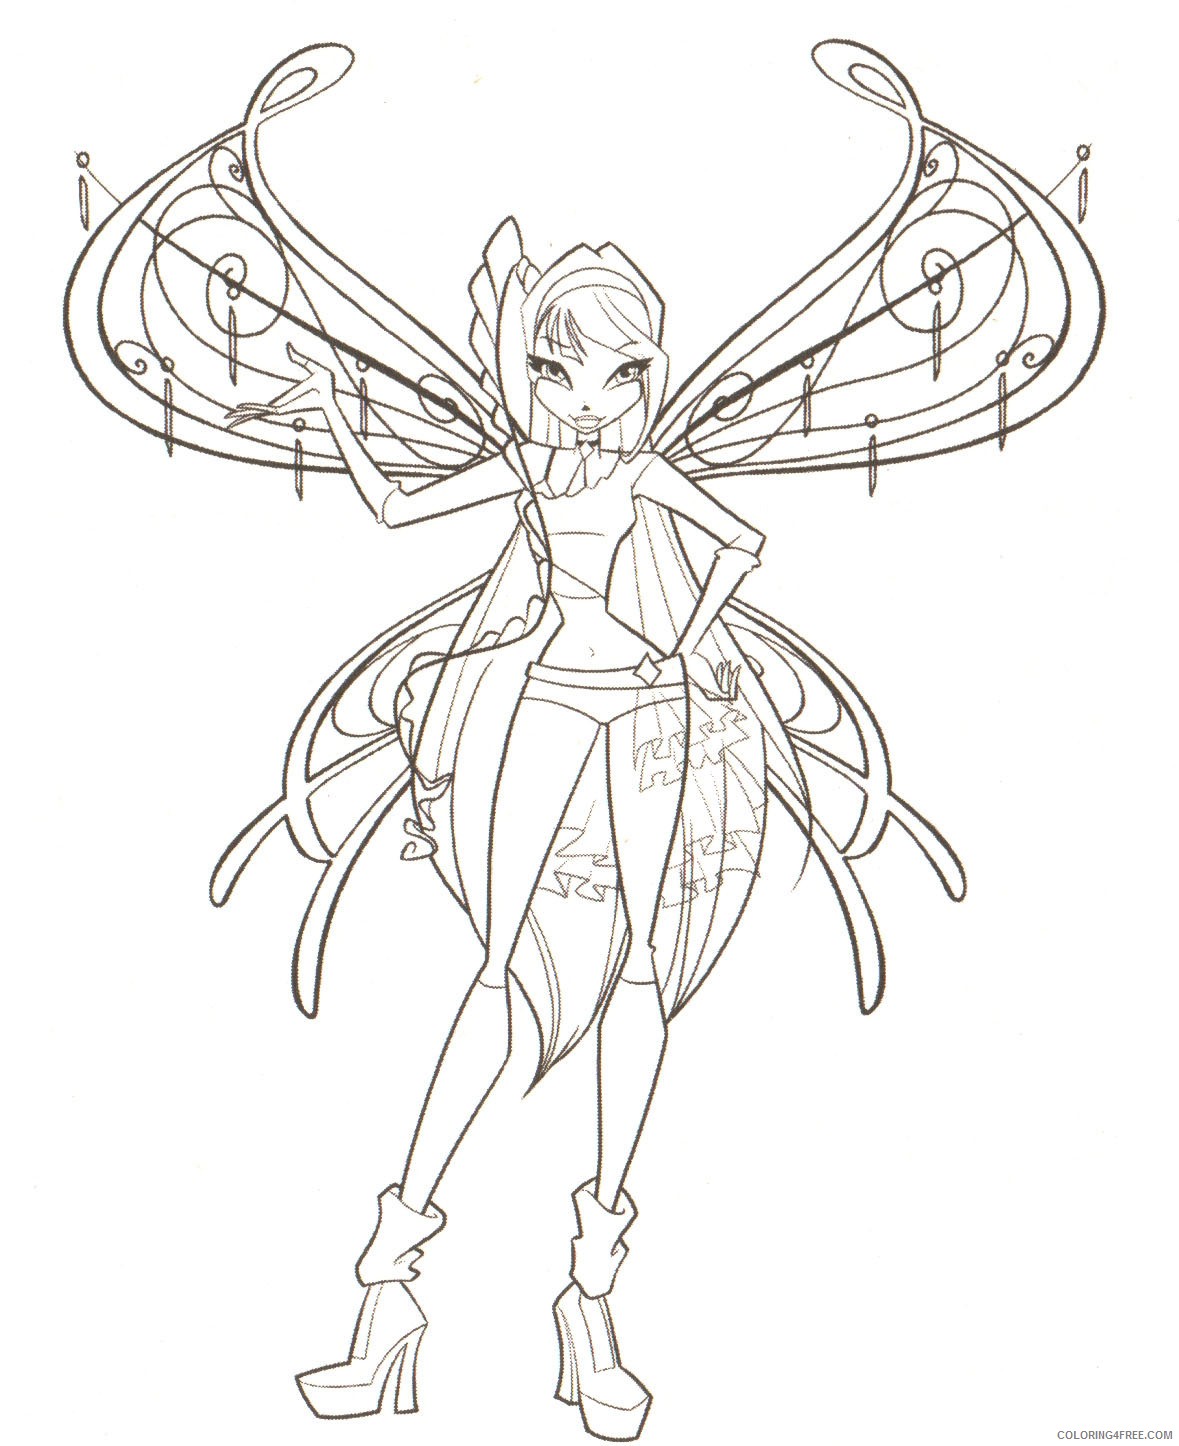 printable winx club coloring pages for kids Coloring4free